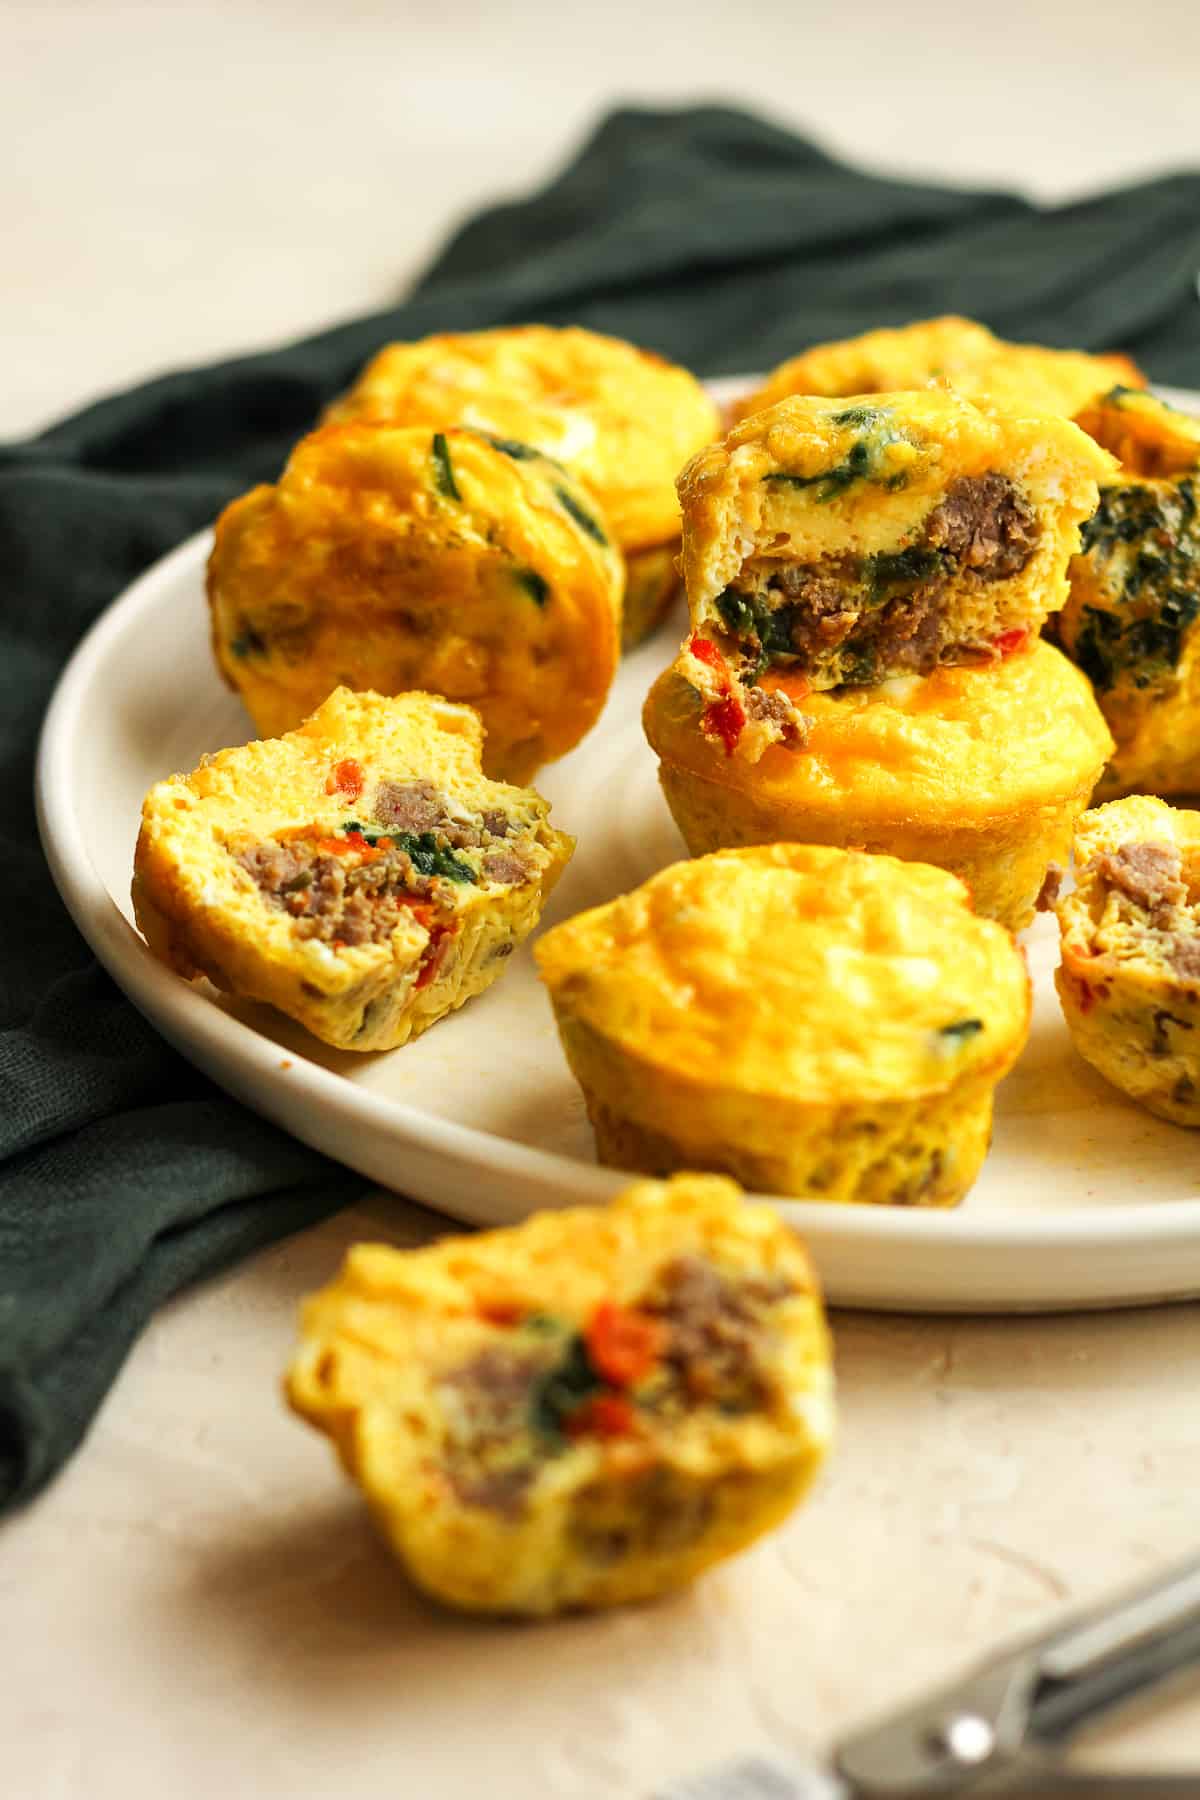 Side view of a plate of sausage egg and cheese muffins with some split in half.